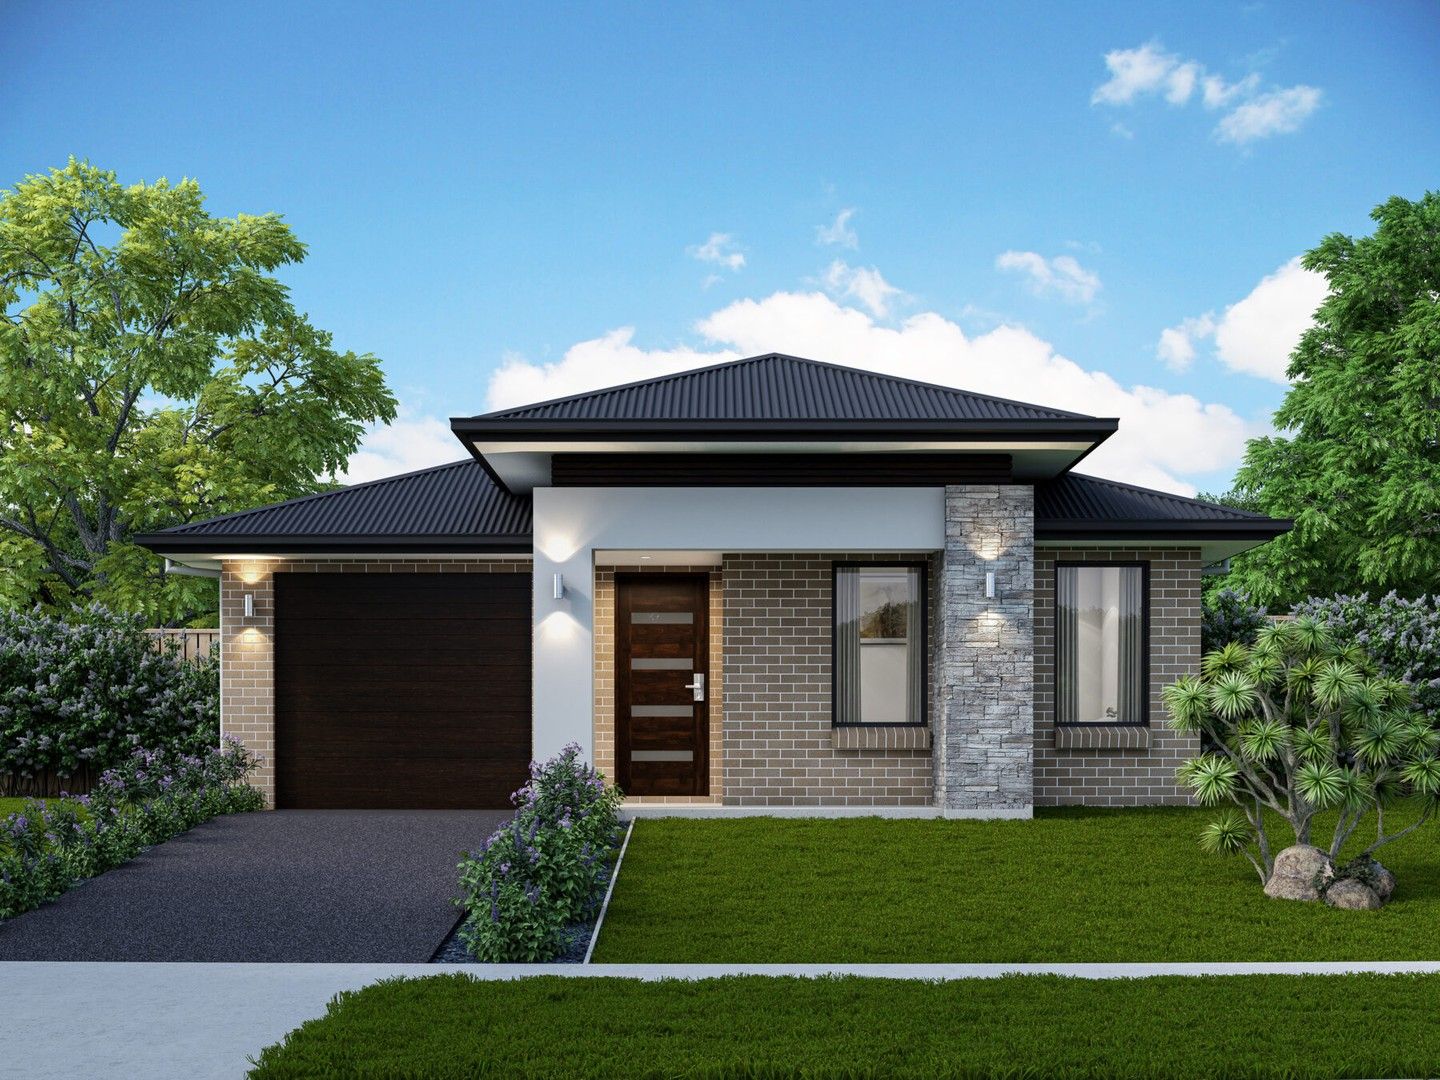 3 bedrooms New House & Land in REGISTERED LAND $810K ONLY LAST LEFT BOX HILL NSW, 2765